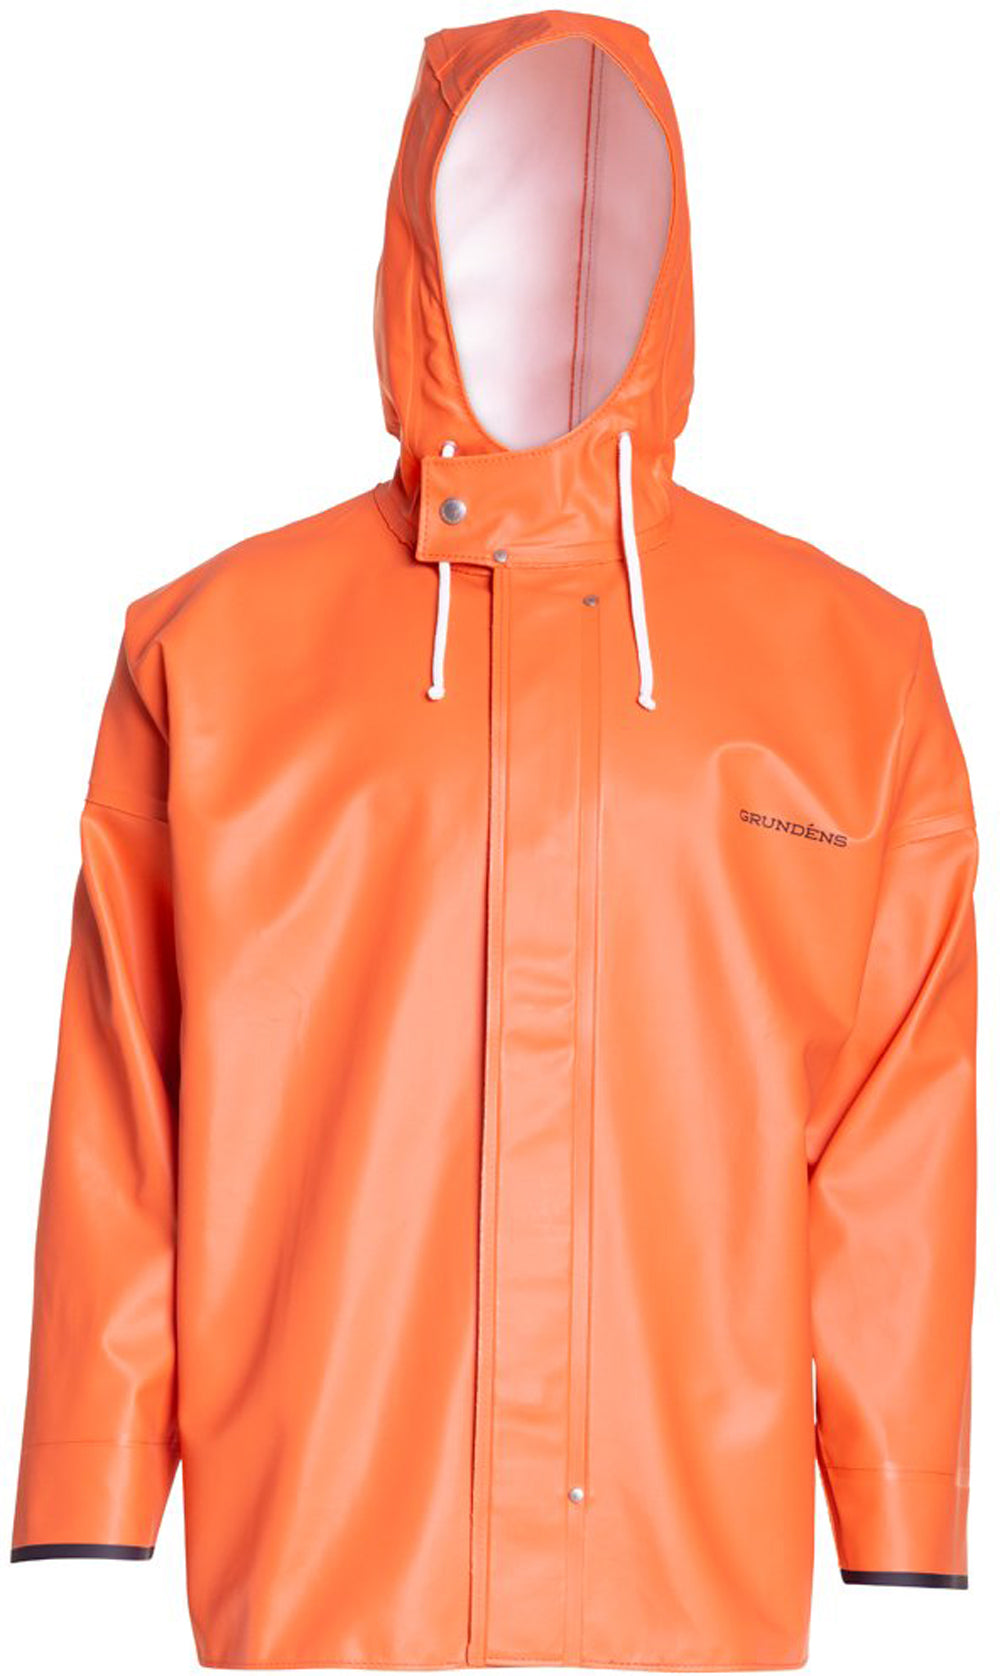 Brigg 40 Rainjacket in Orange color from the front view